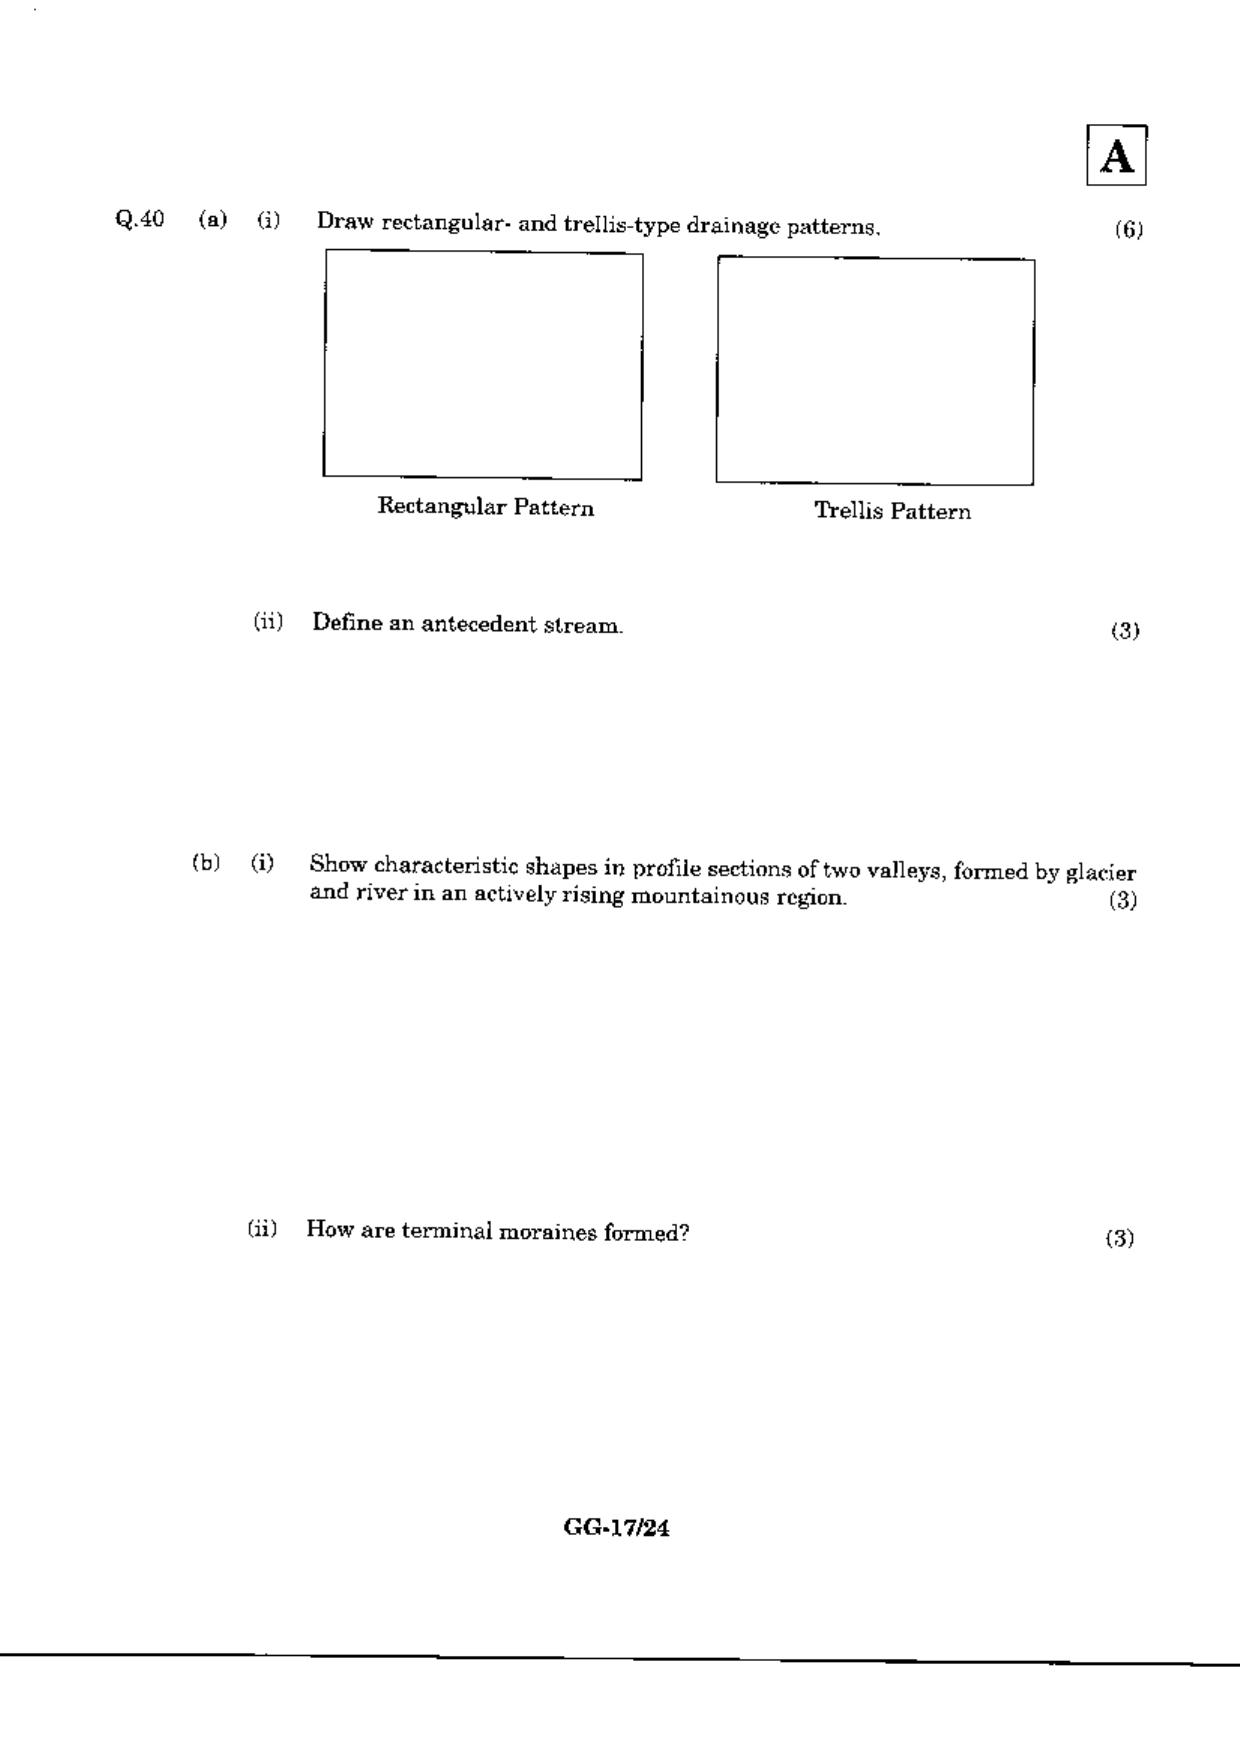 JAM 2010: GG Question Paper - Page 19